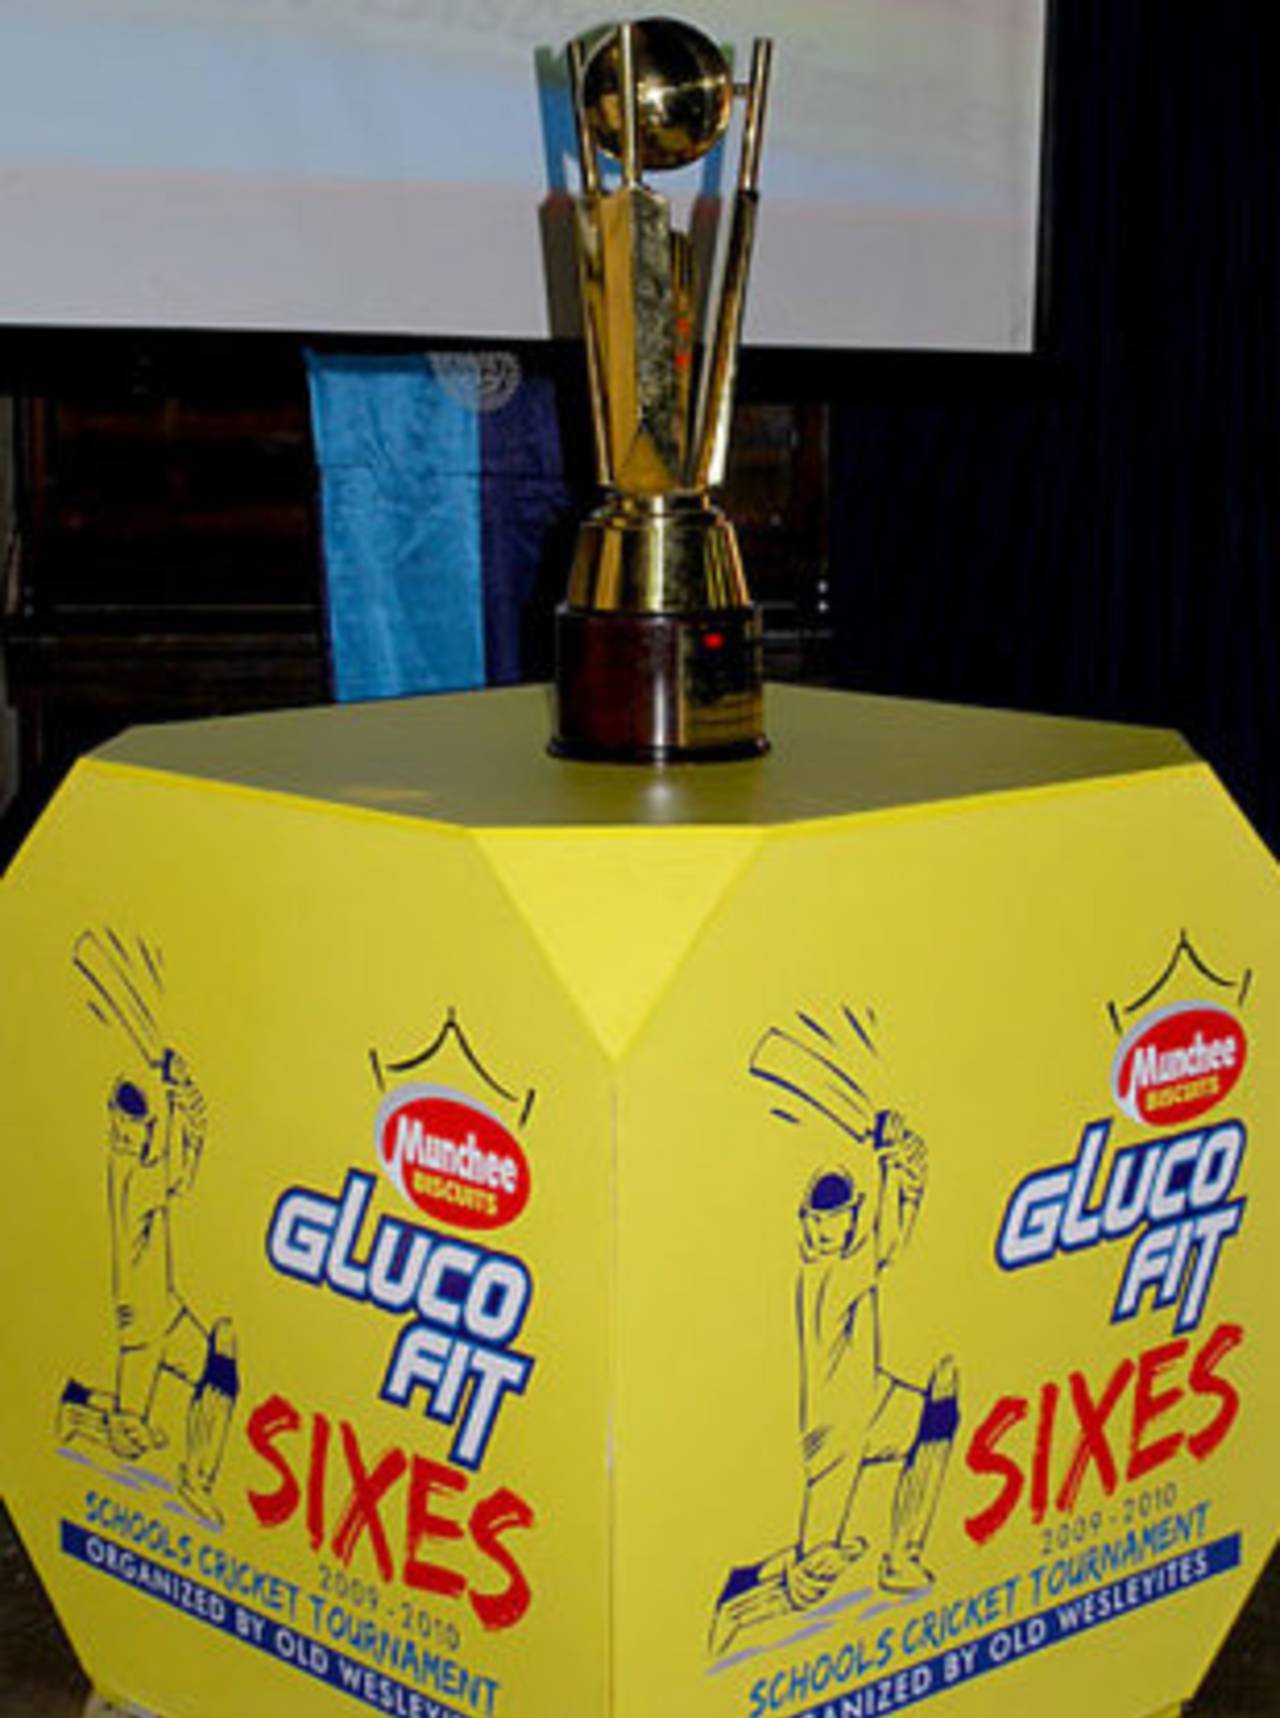 The Glucofit Sixes trophy on display, Colombo, September 18, 2009